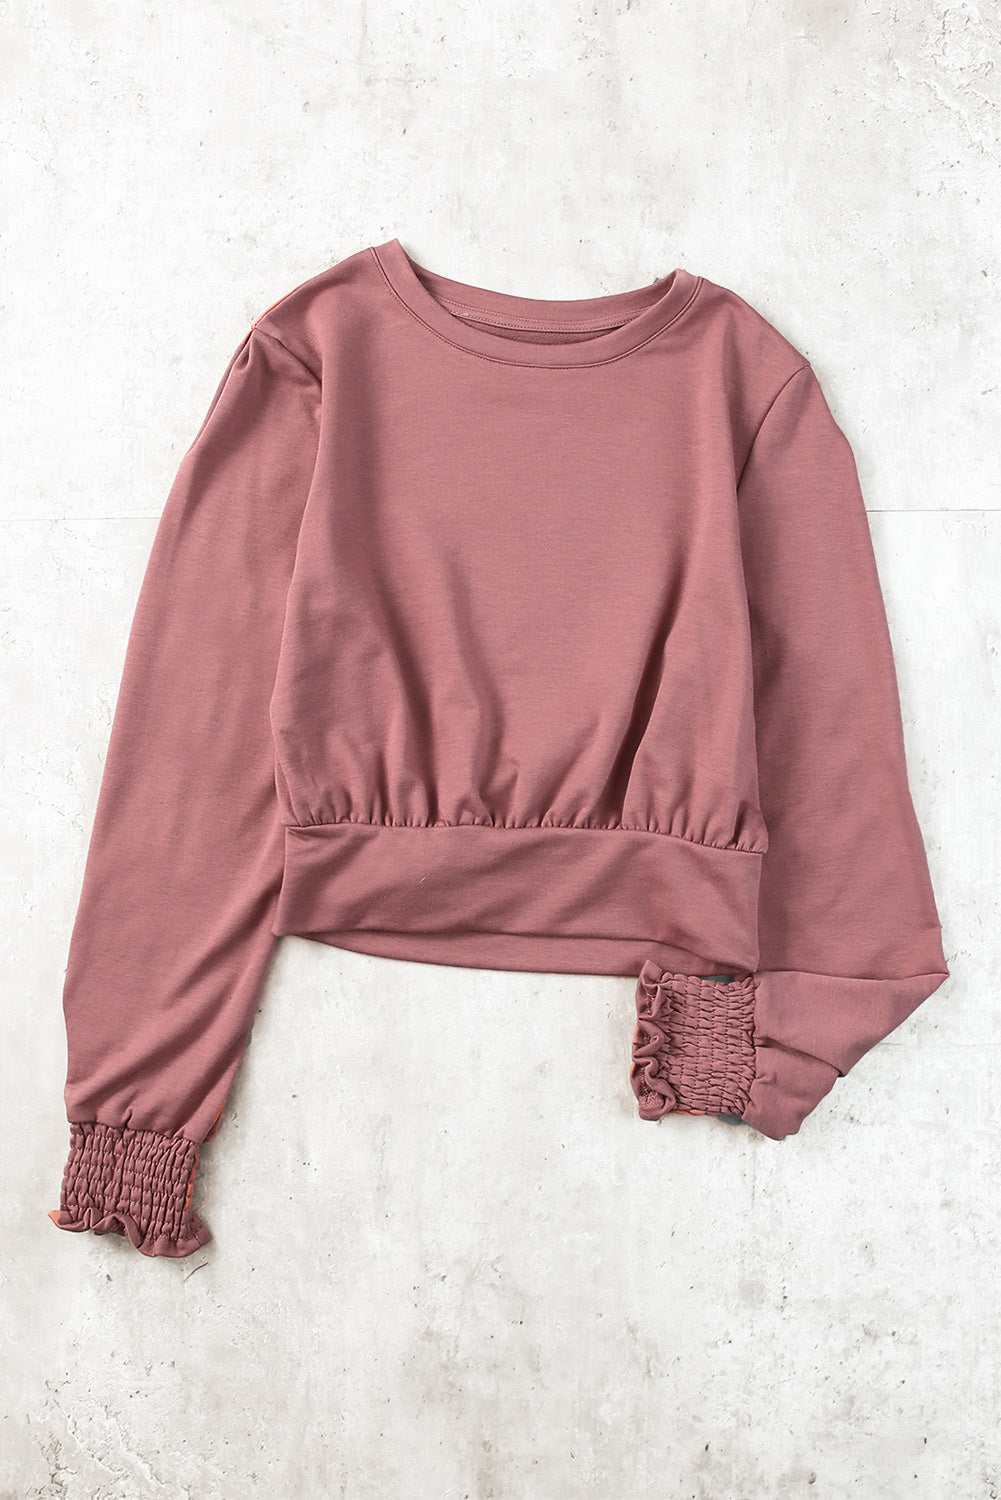 Connie Pink Casual Banded Hem Smocking Cuffs Crop Top